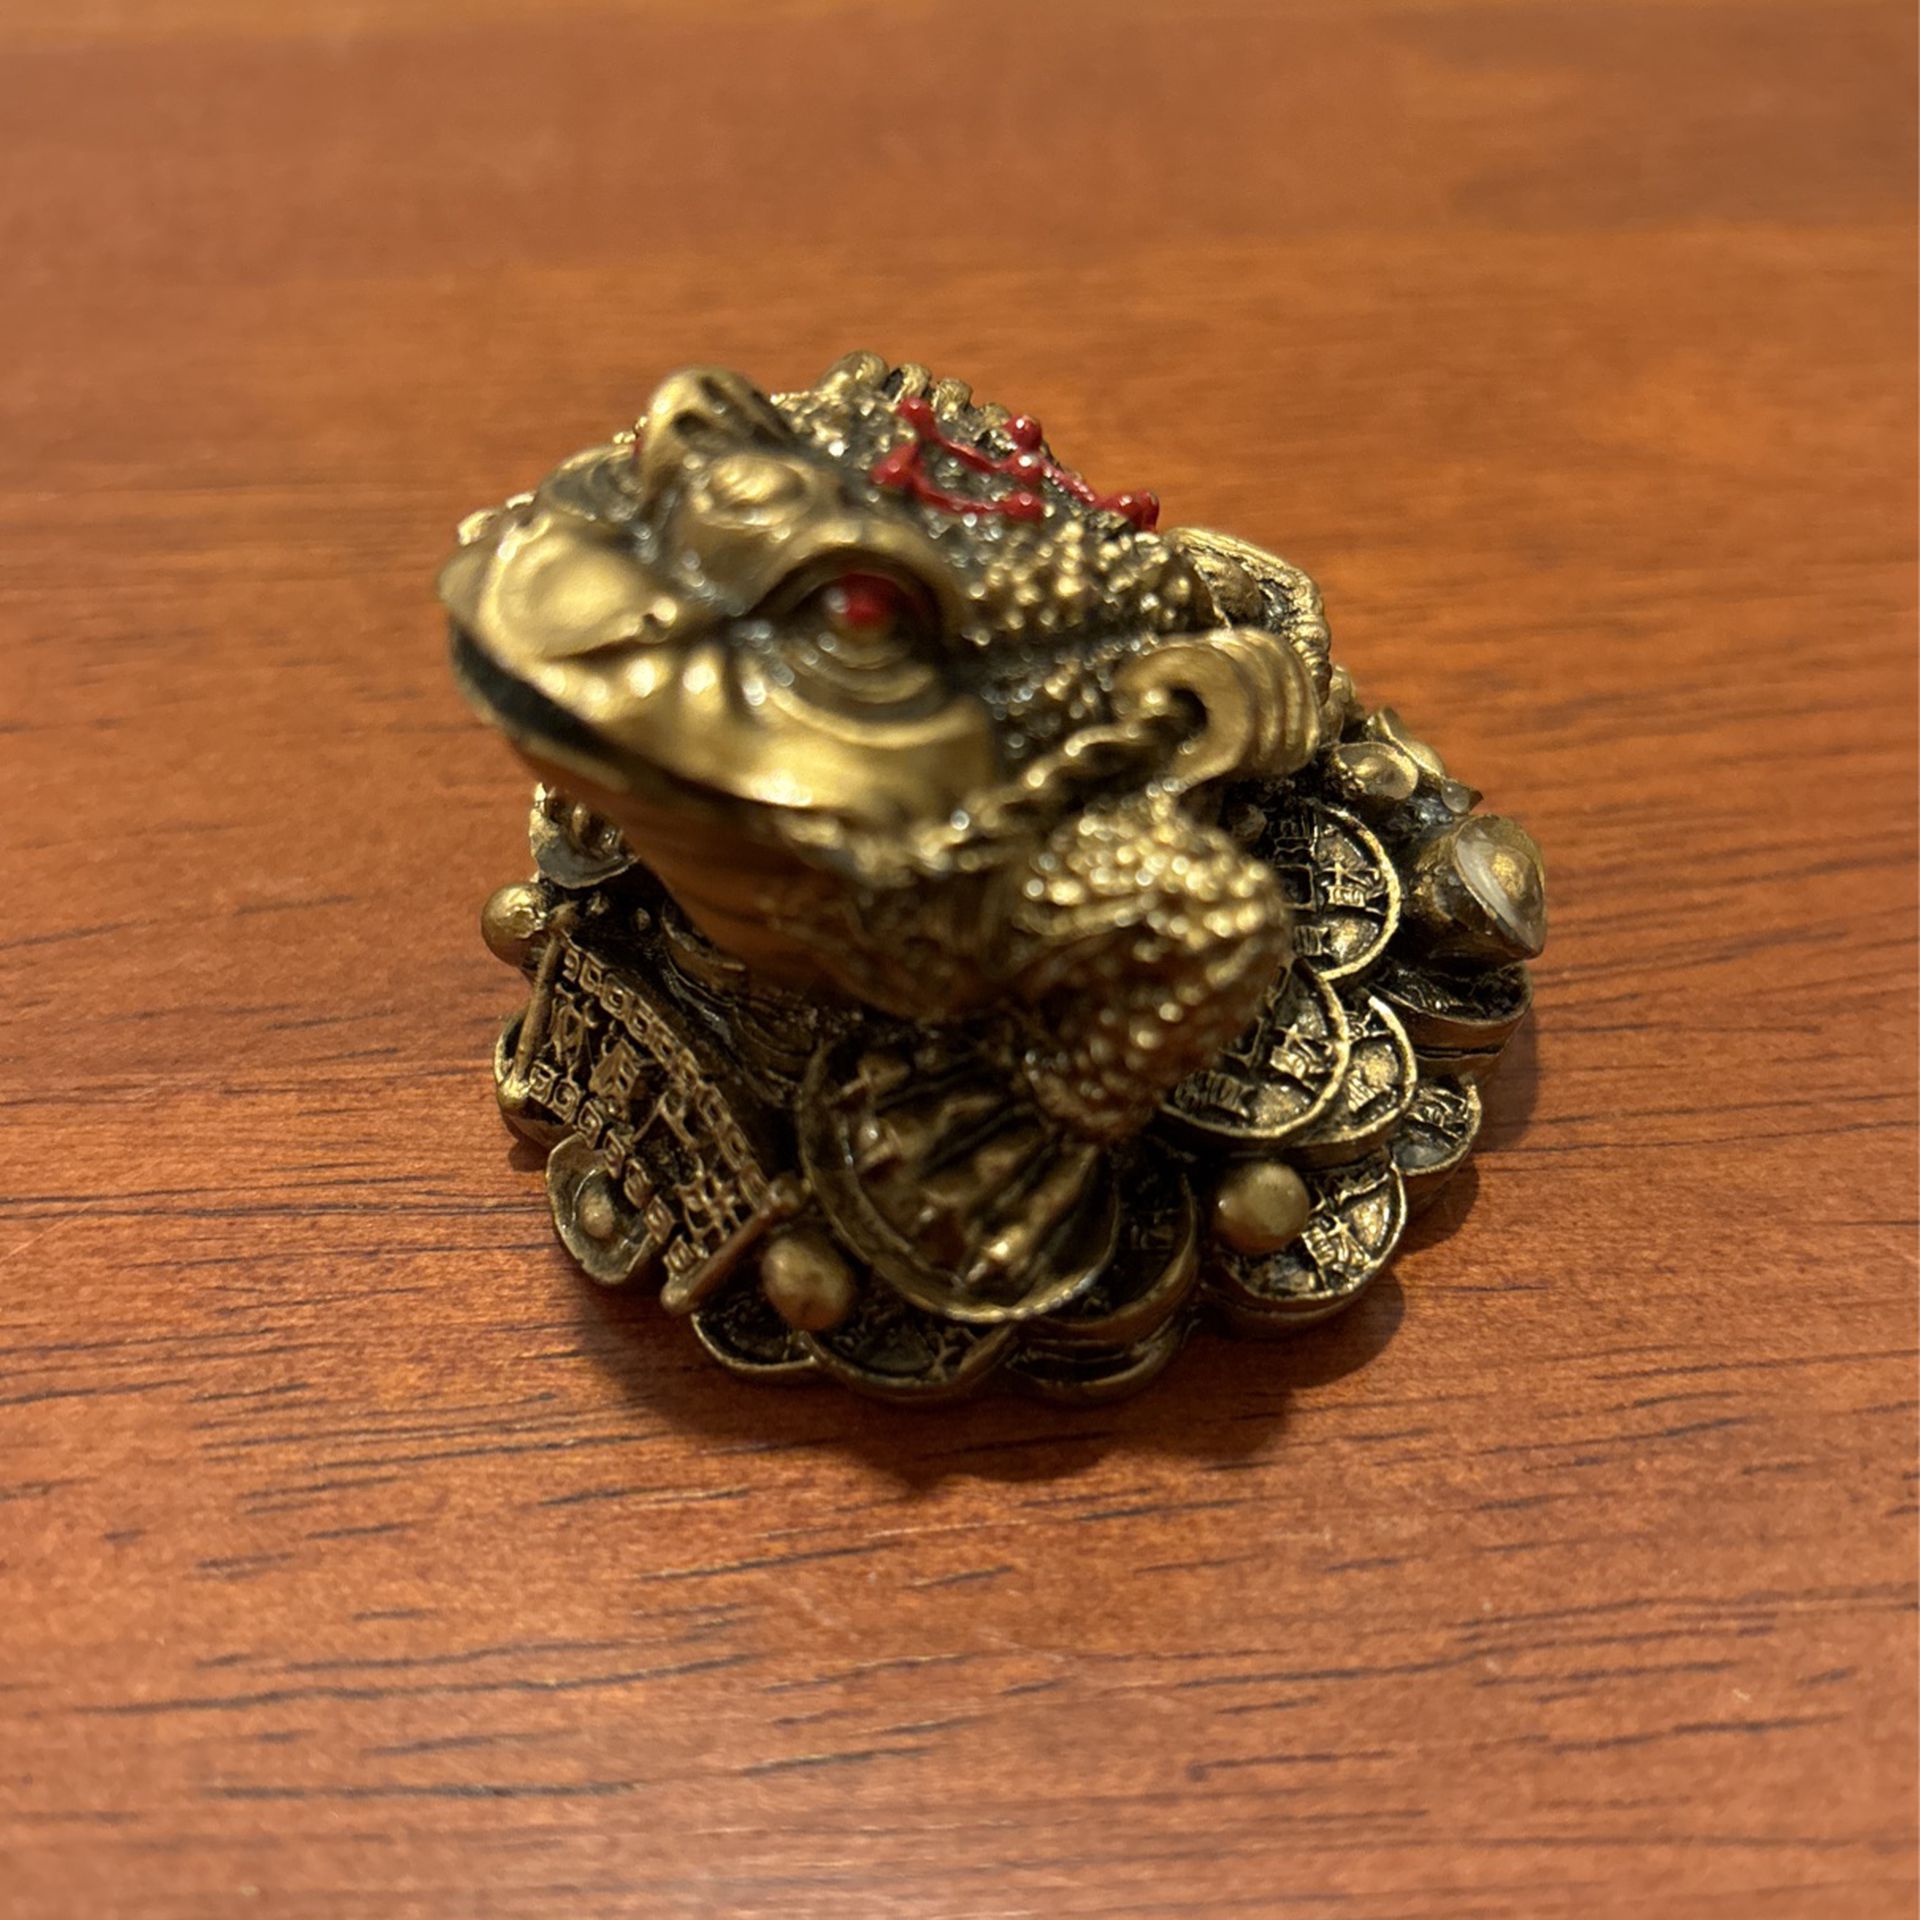 Monkey toad good luck statue coin, not included, 1-1/2” x 2 1/2”. S2